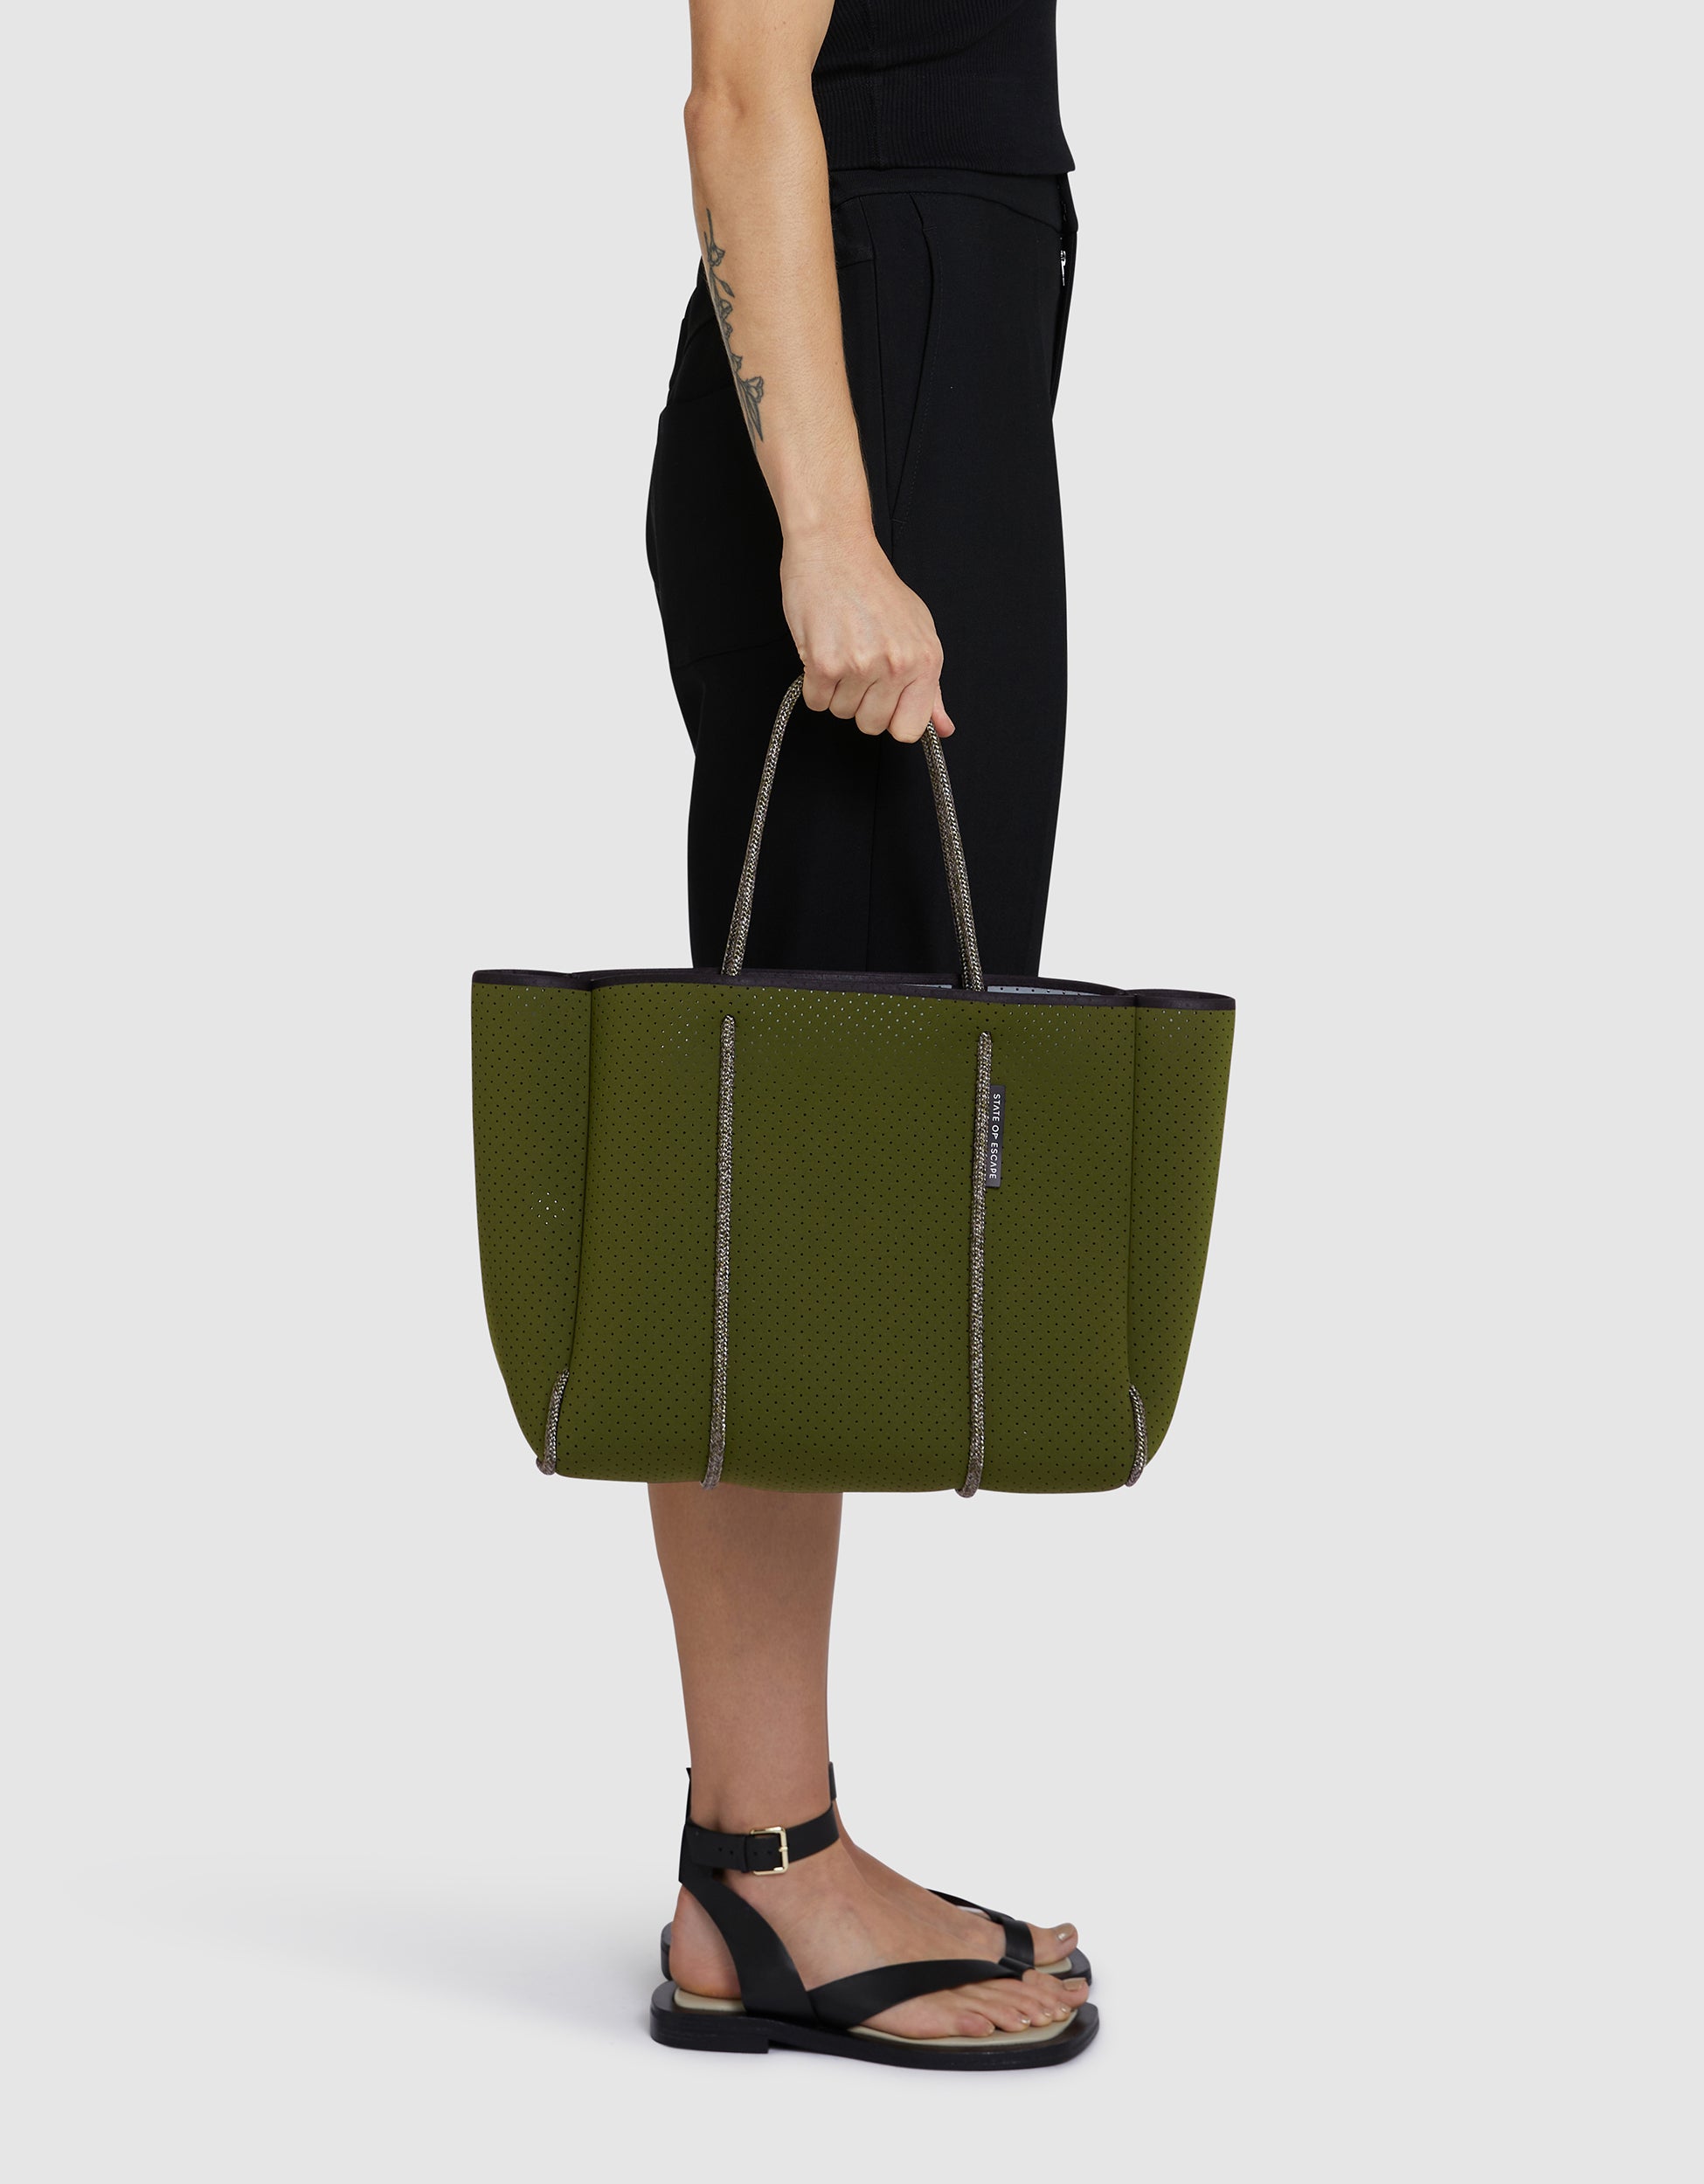 Flying Solo tote in khaki / grey (dual tone) – State of Escape